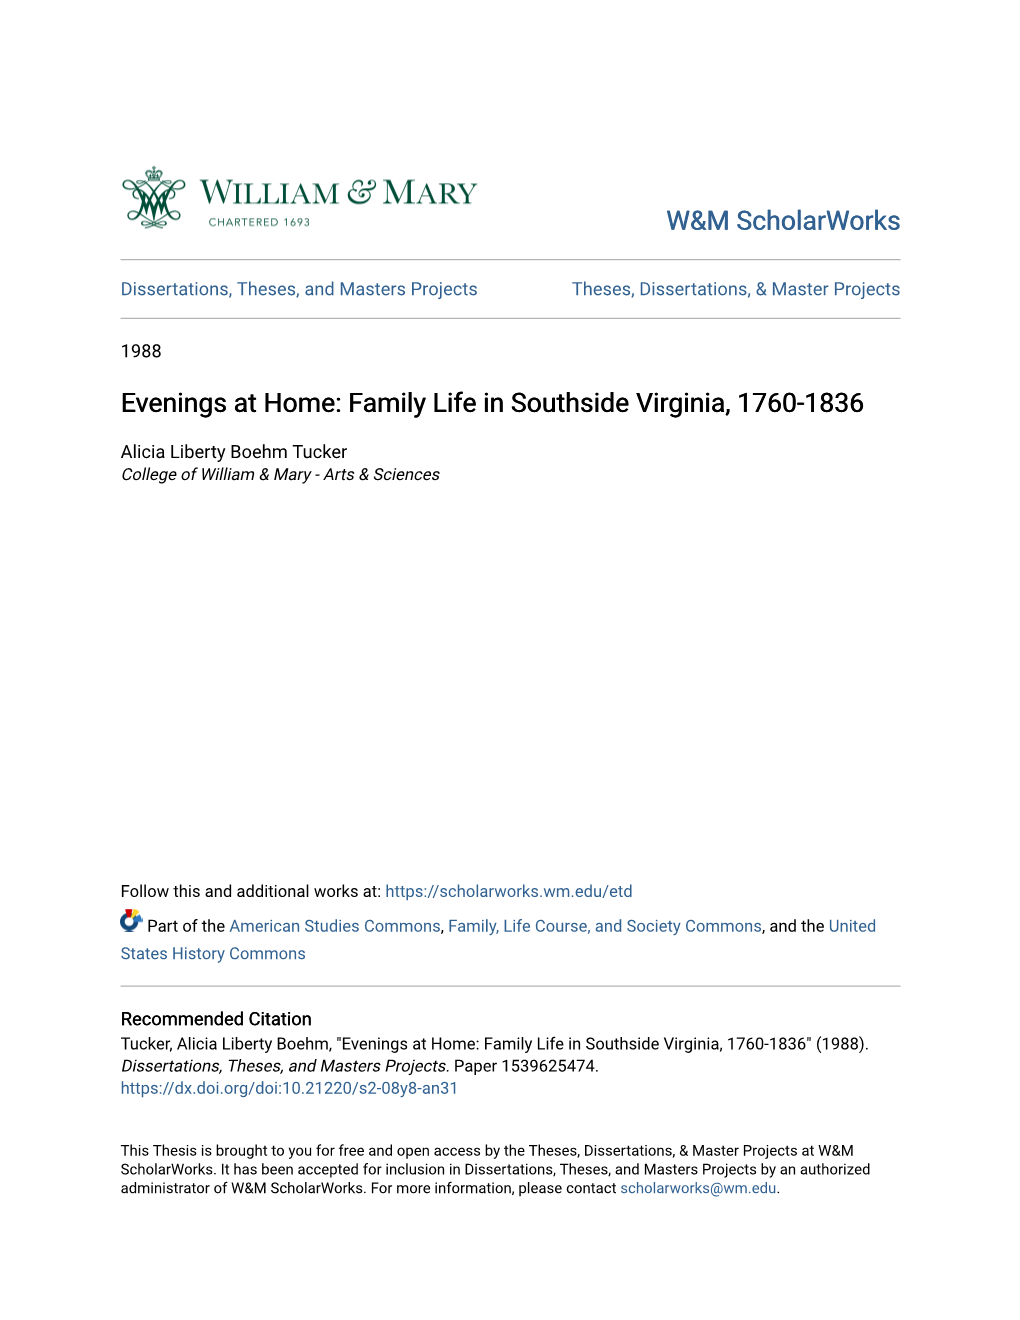 Evenings at Home: Family Life in Southside Virginia, 1760-1836